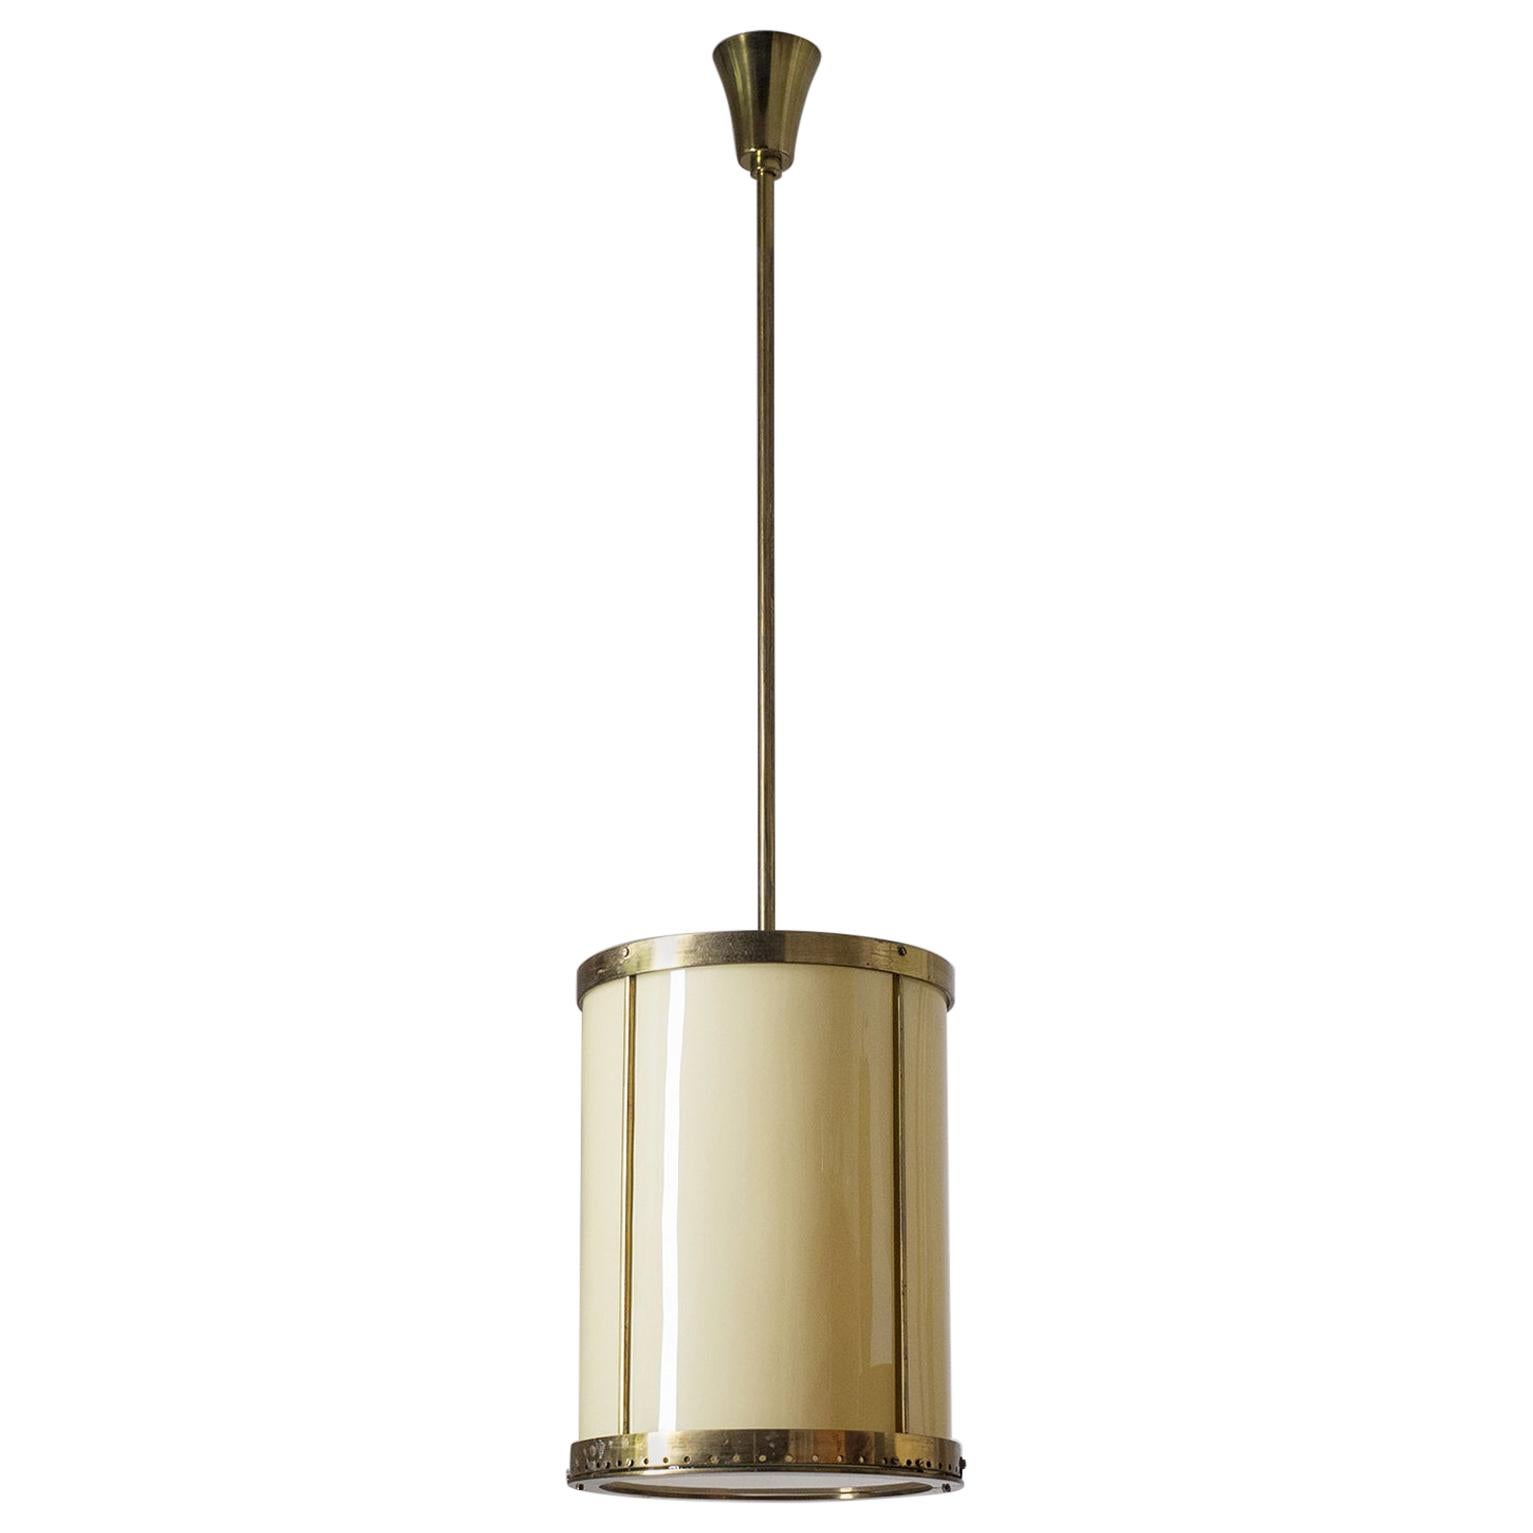 Oversize Drum Lantern, 1930s, Sand-Colored Glass and Brass For Sale